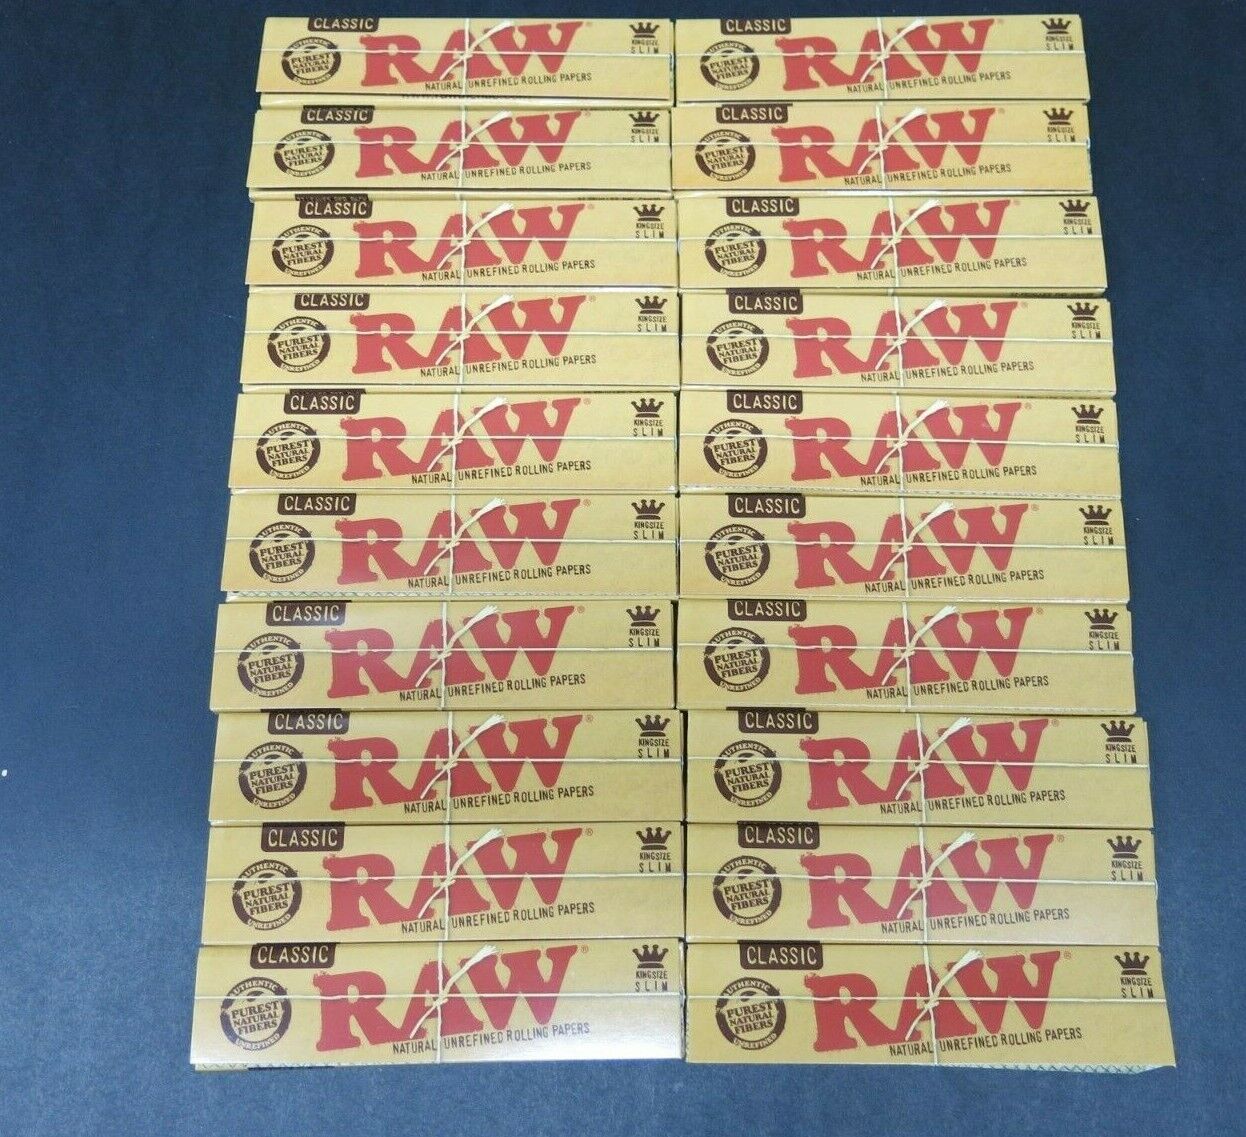 20 Packs Raw Classic King Size Slim Natural Unrefined Rolling Papers  